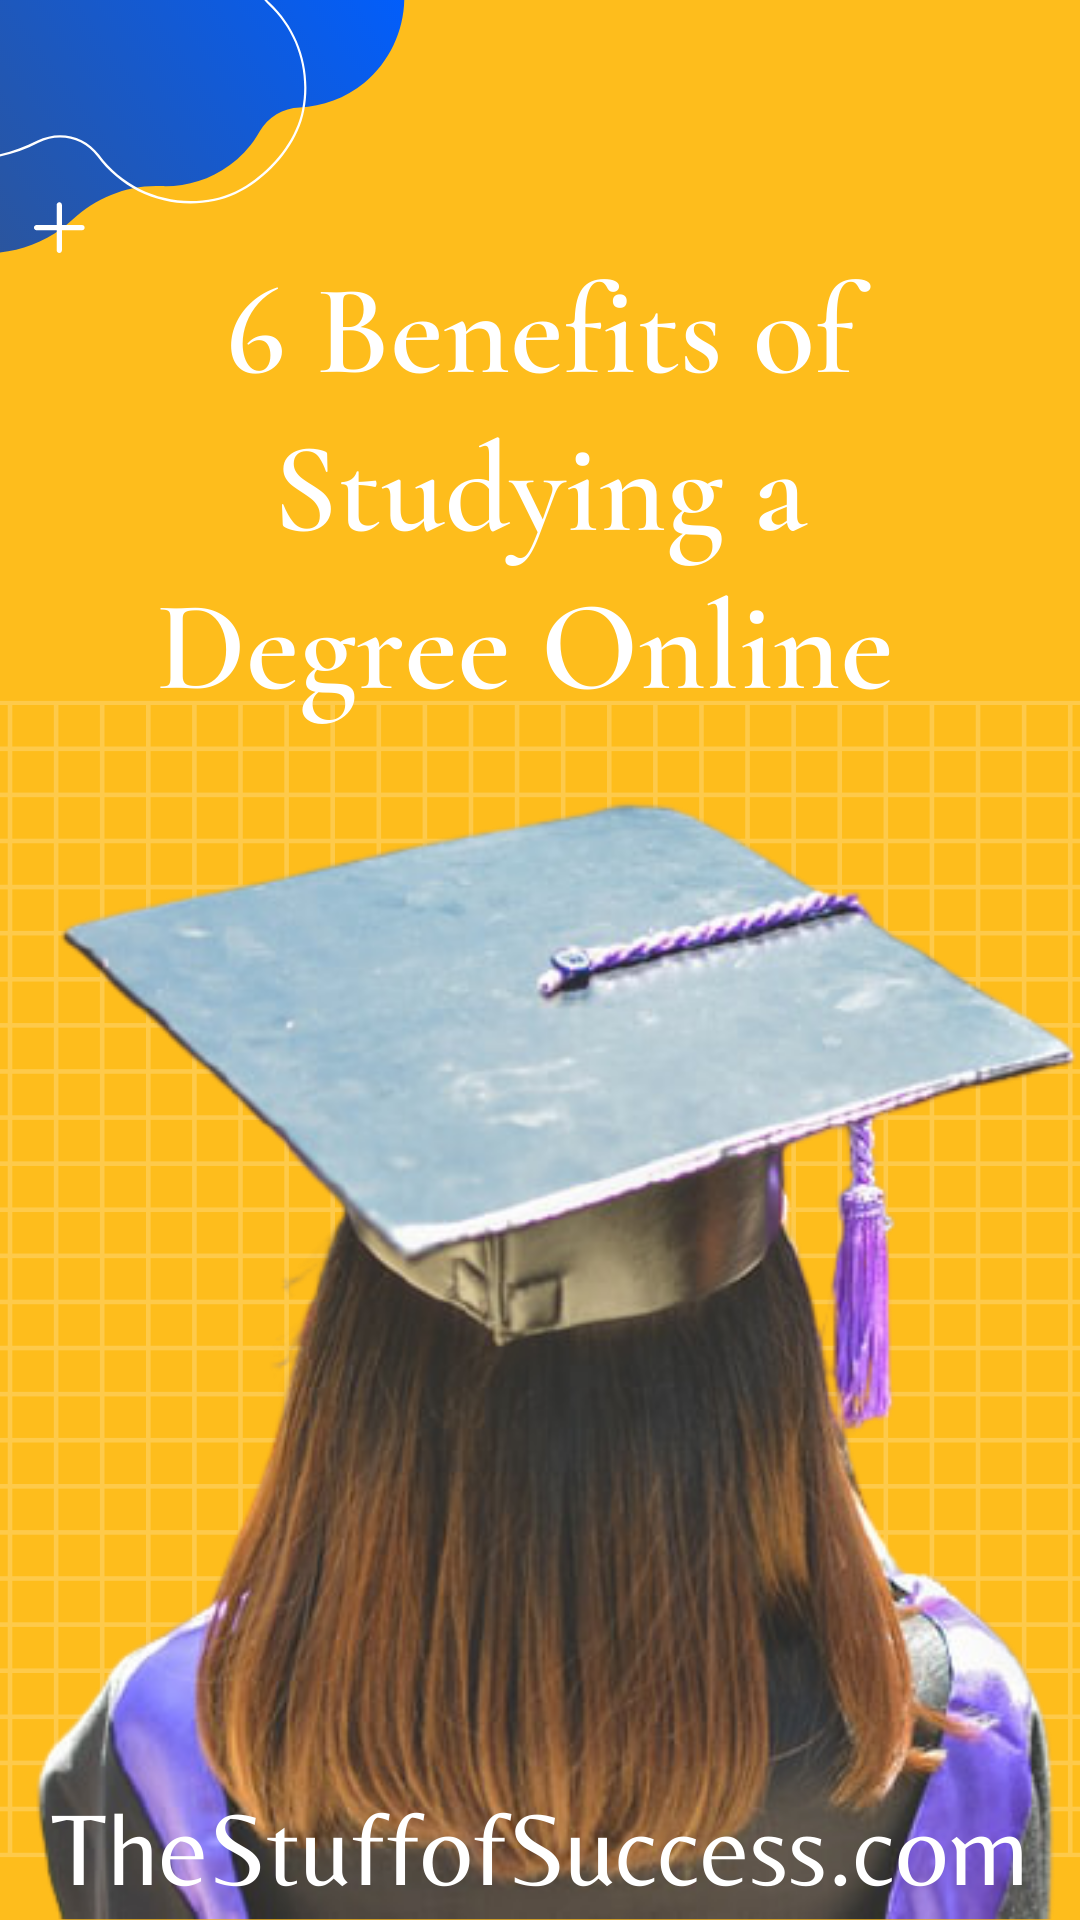 6 Benefits of Studying a Degree Online